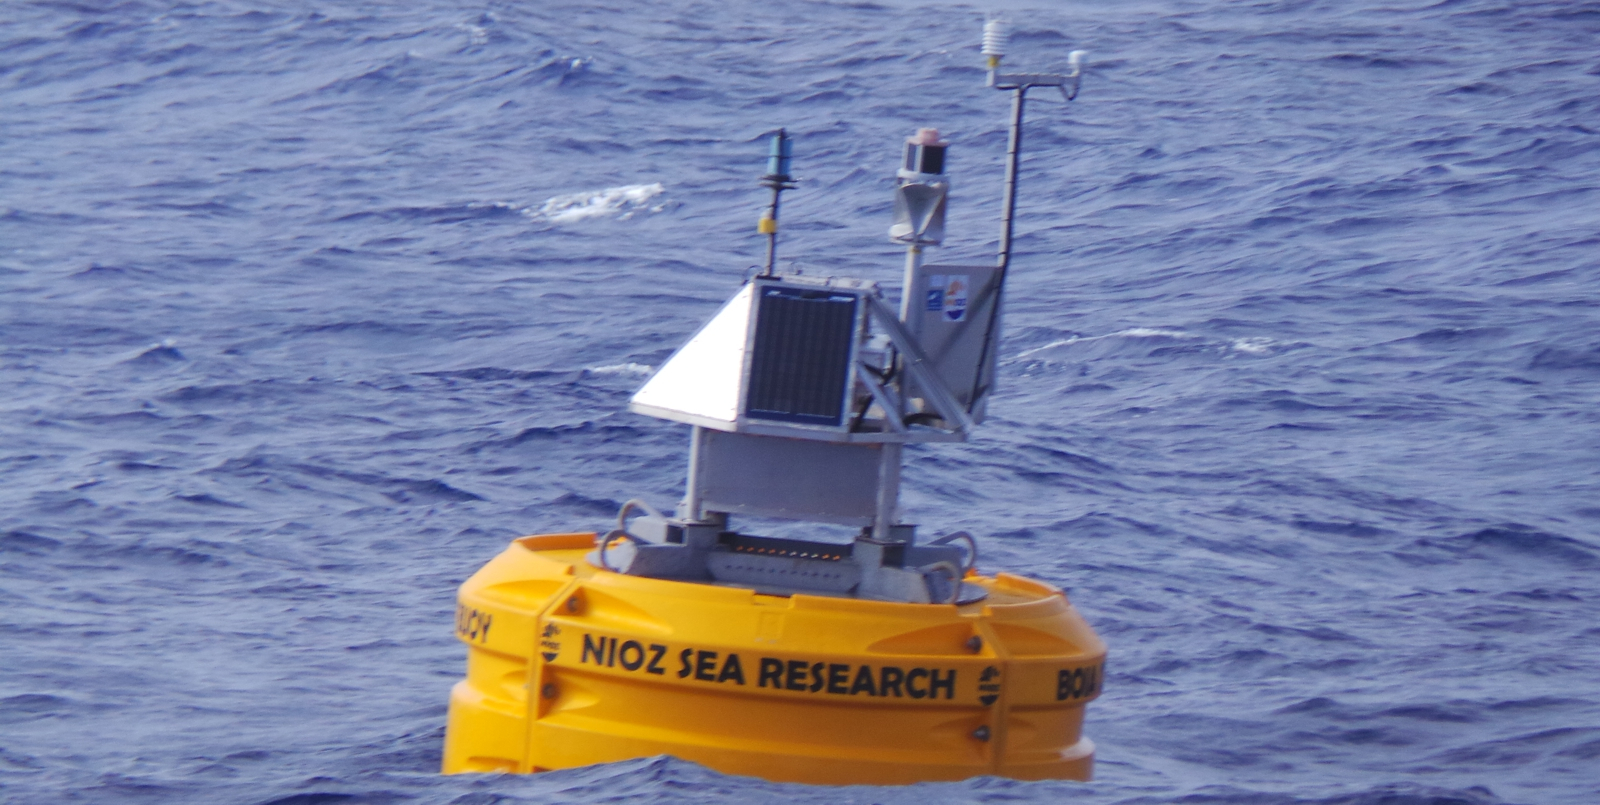 One of the NIOZ dust-collecting buoys in action at sea.